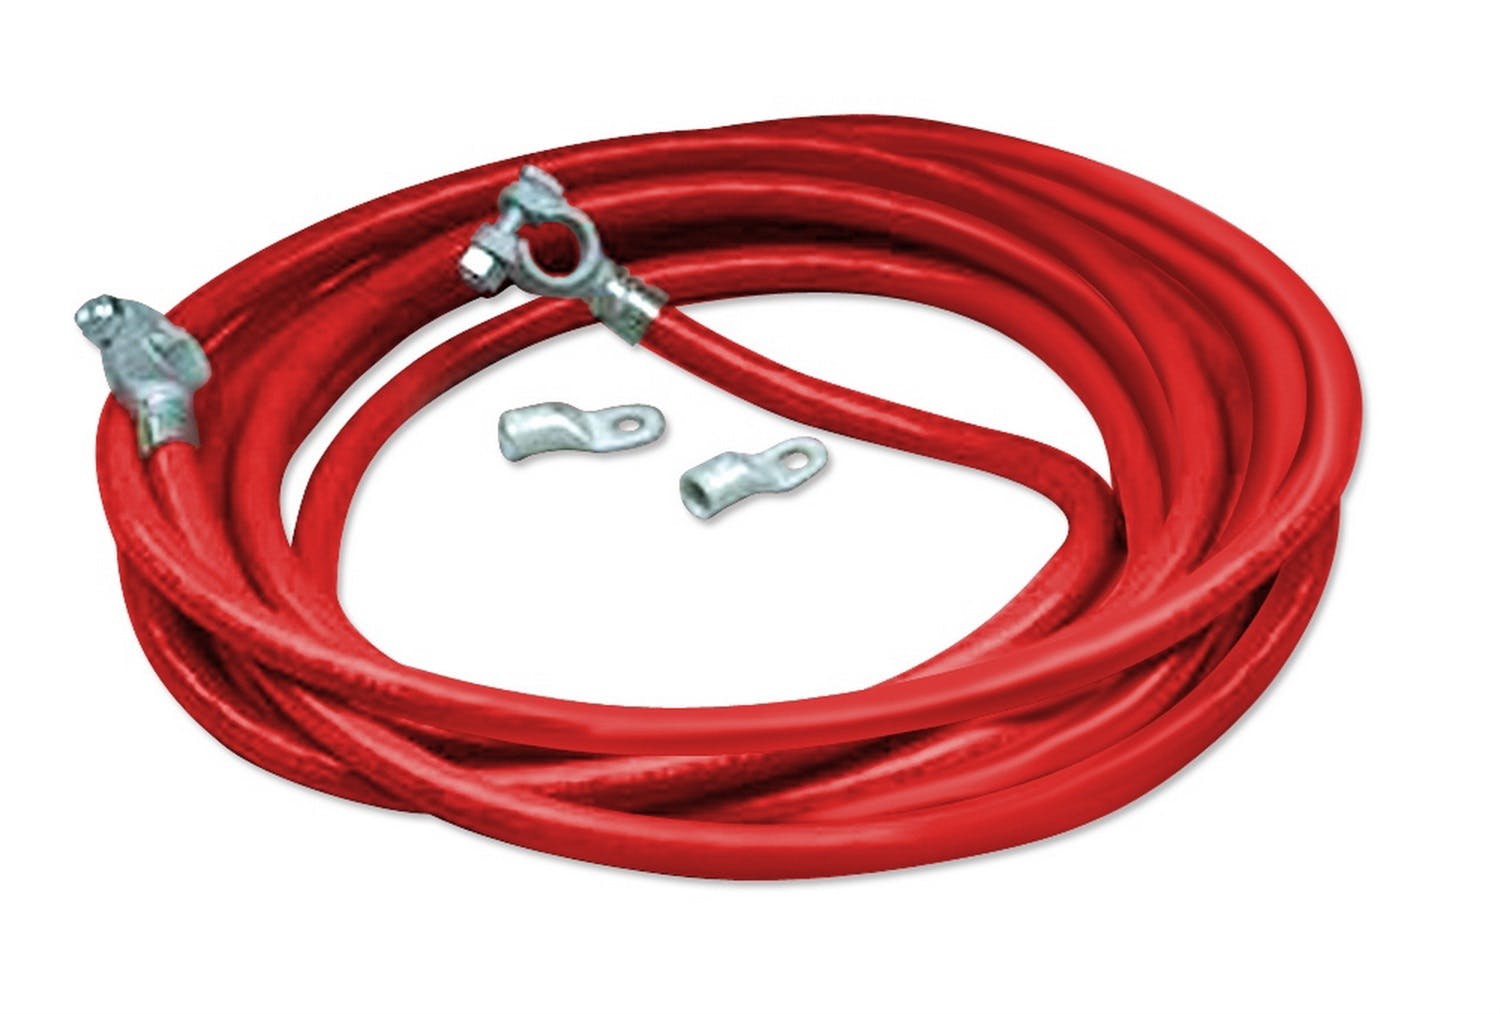 Taylor Cable Products 21550 1 ga red 20ft Welding/Battery Cable Kit